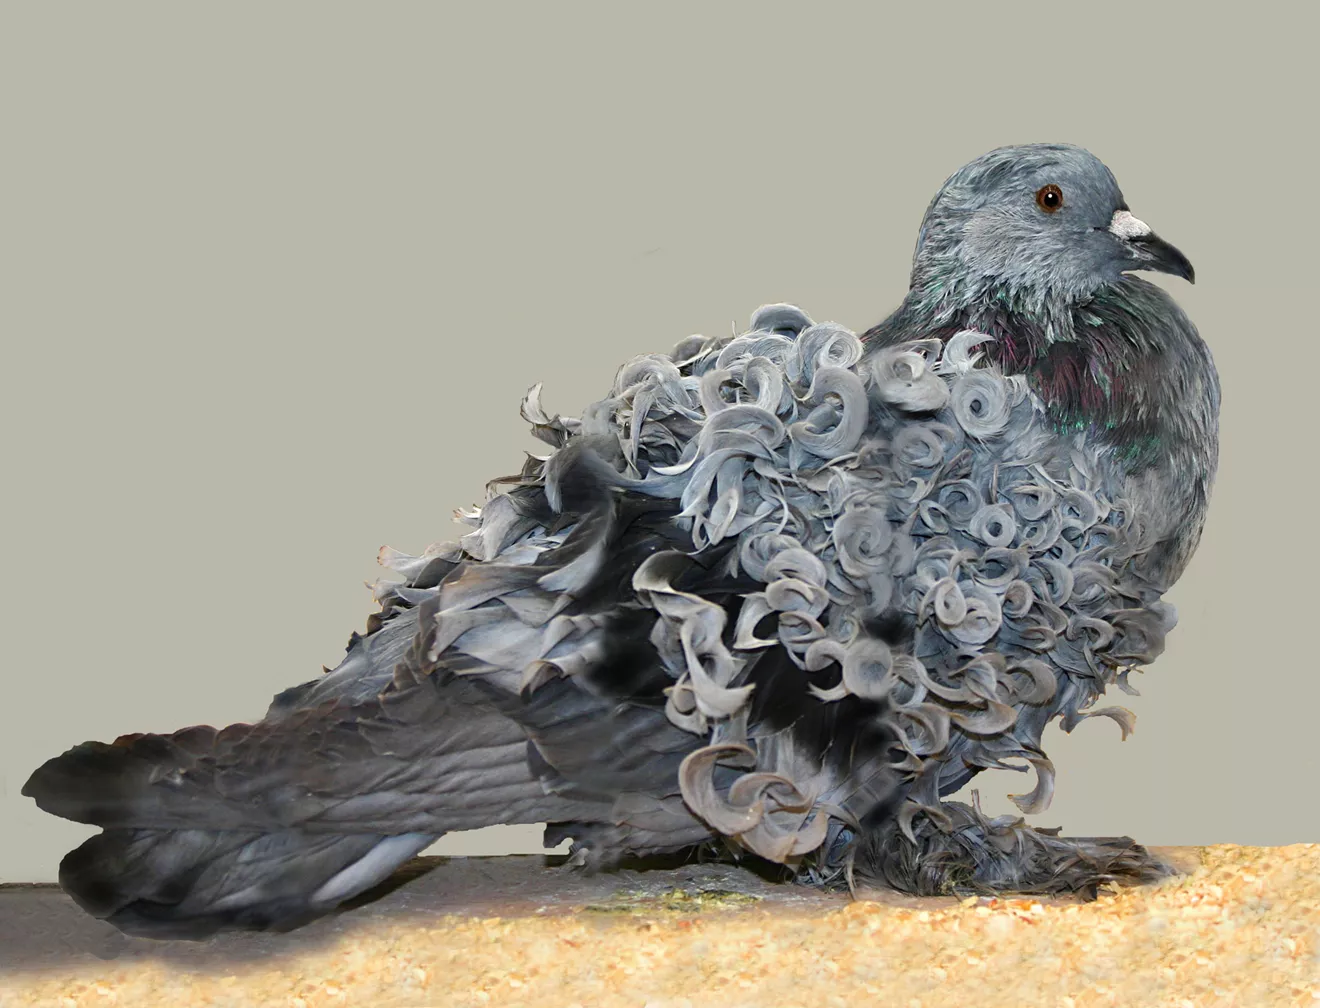 A gray frillback pigeon standing on sawdust-covered ground